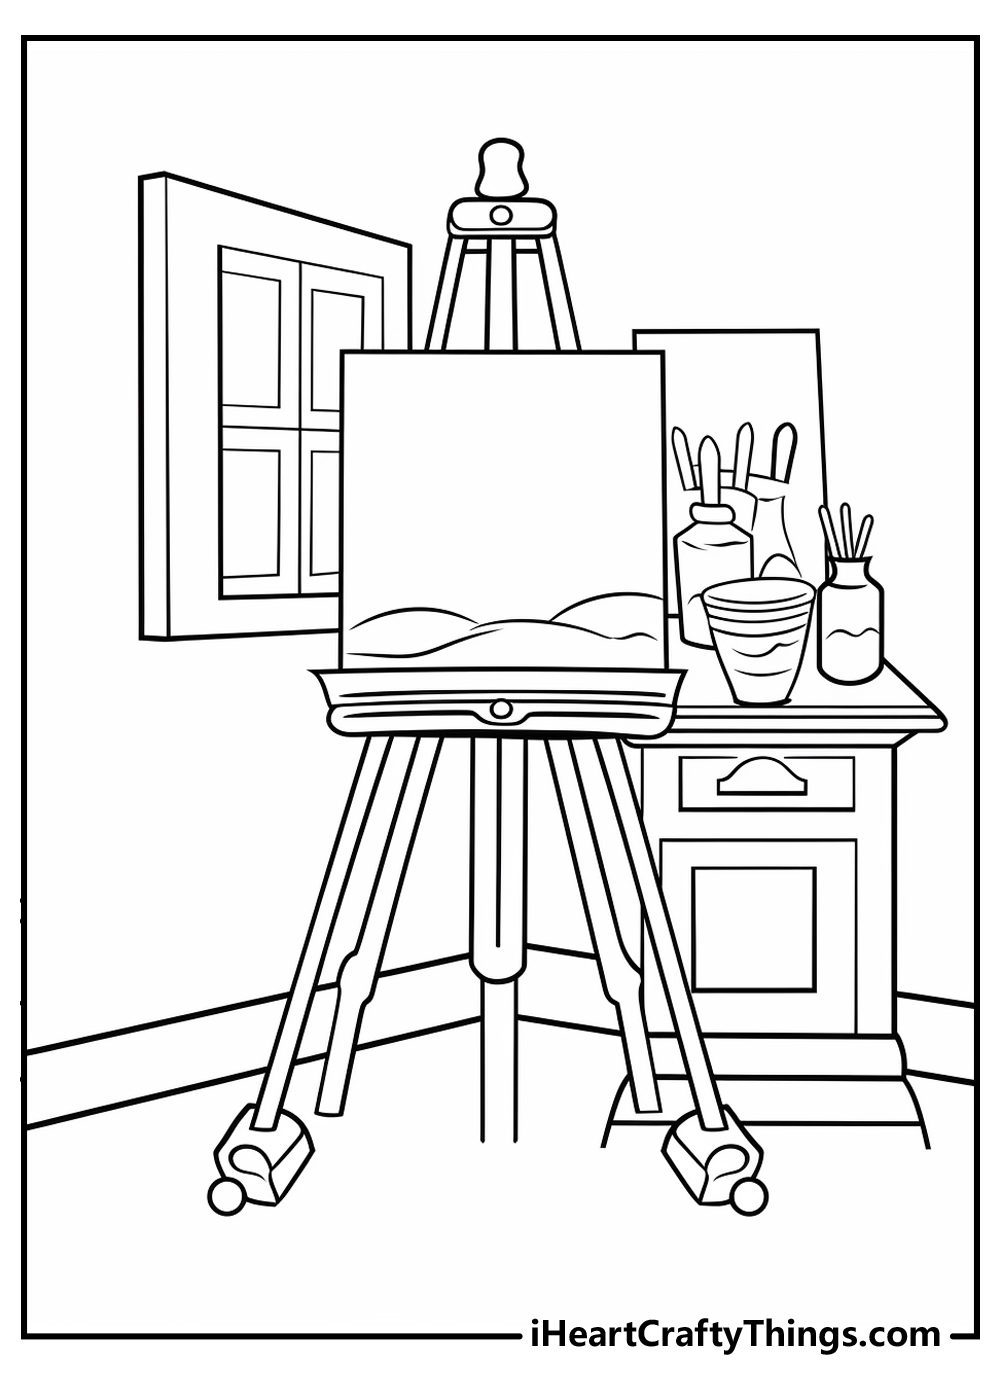 Painting On An Easel Coloring Page